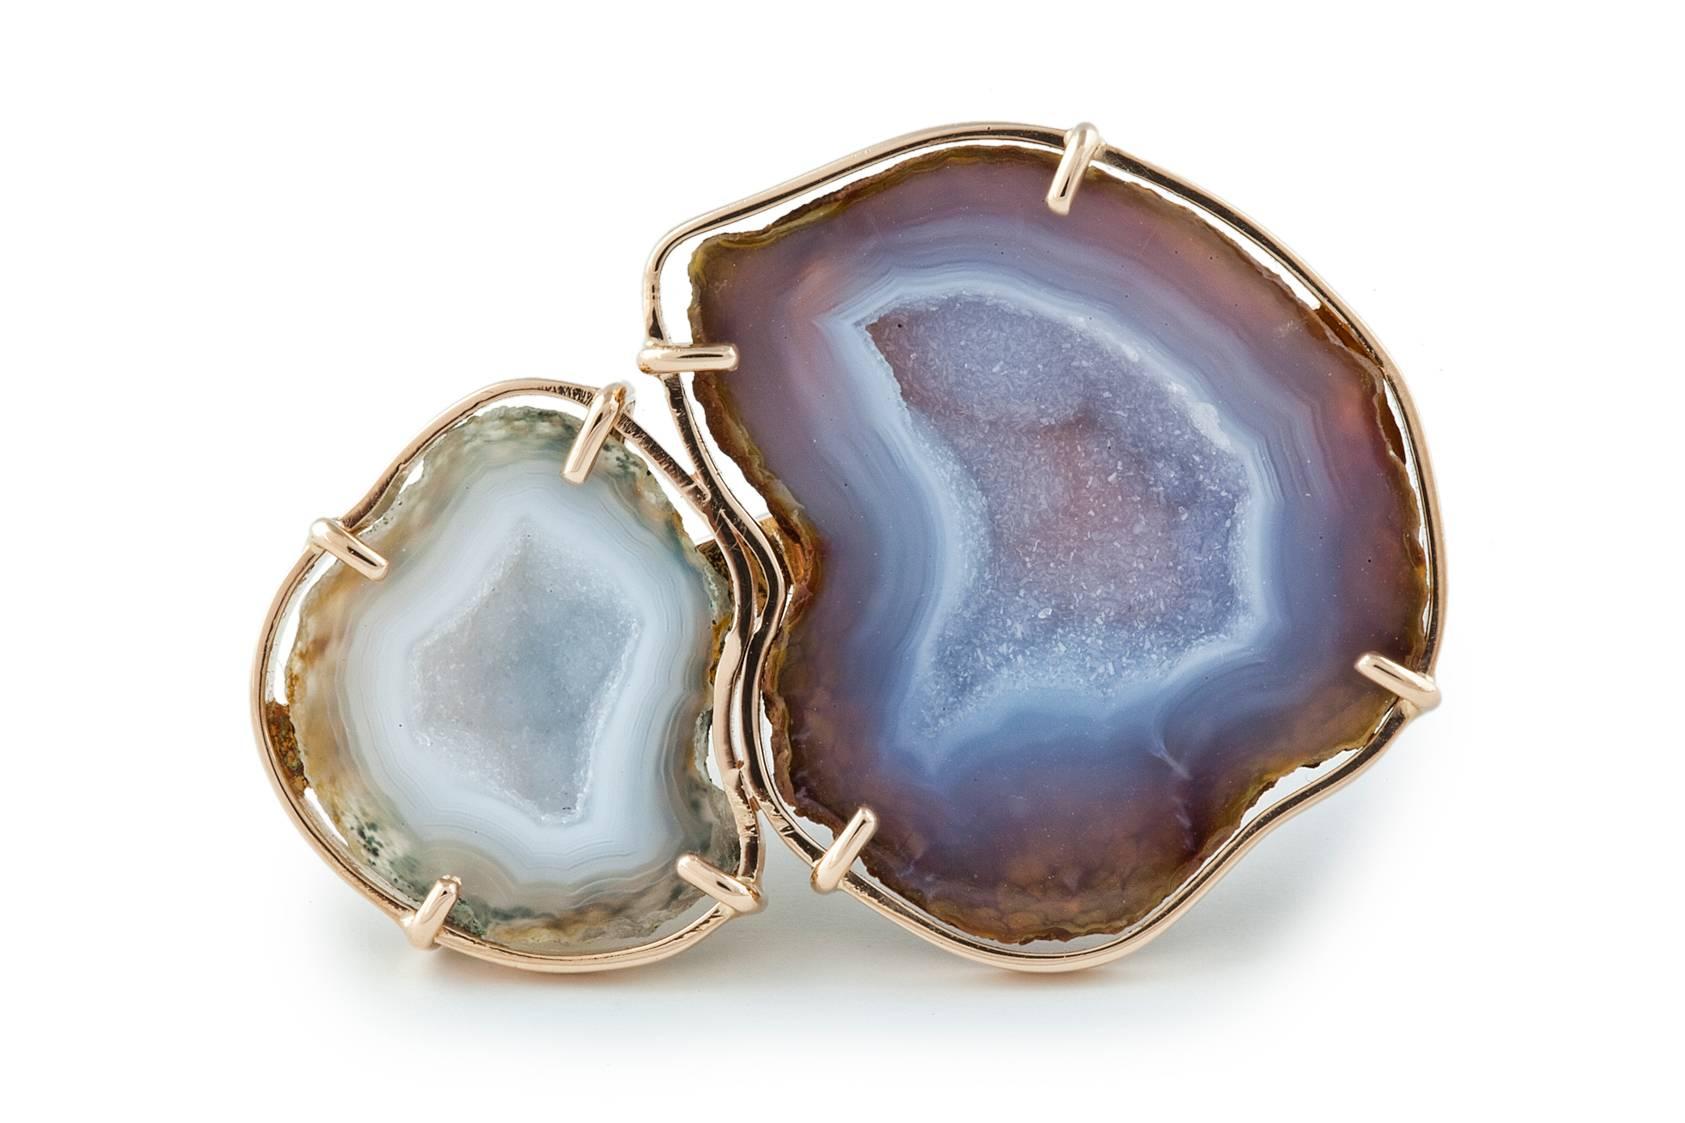 Loving nature, this could be your favorite piece.
This double agate geode ring in two earthy colors is made of 18k rose gold.
It's named after one of the designers best friends.